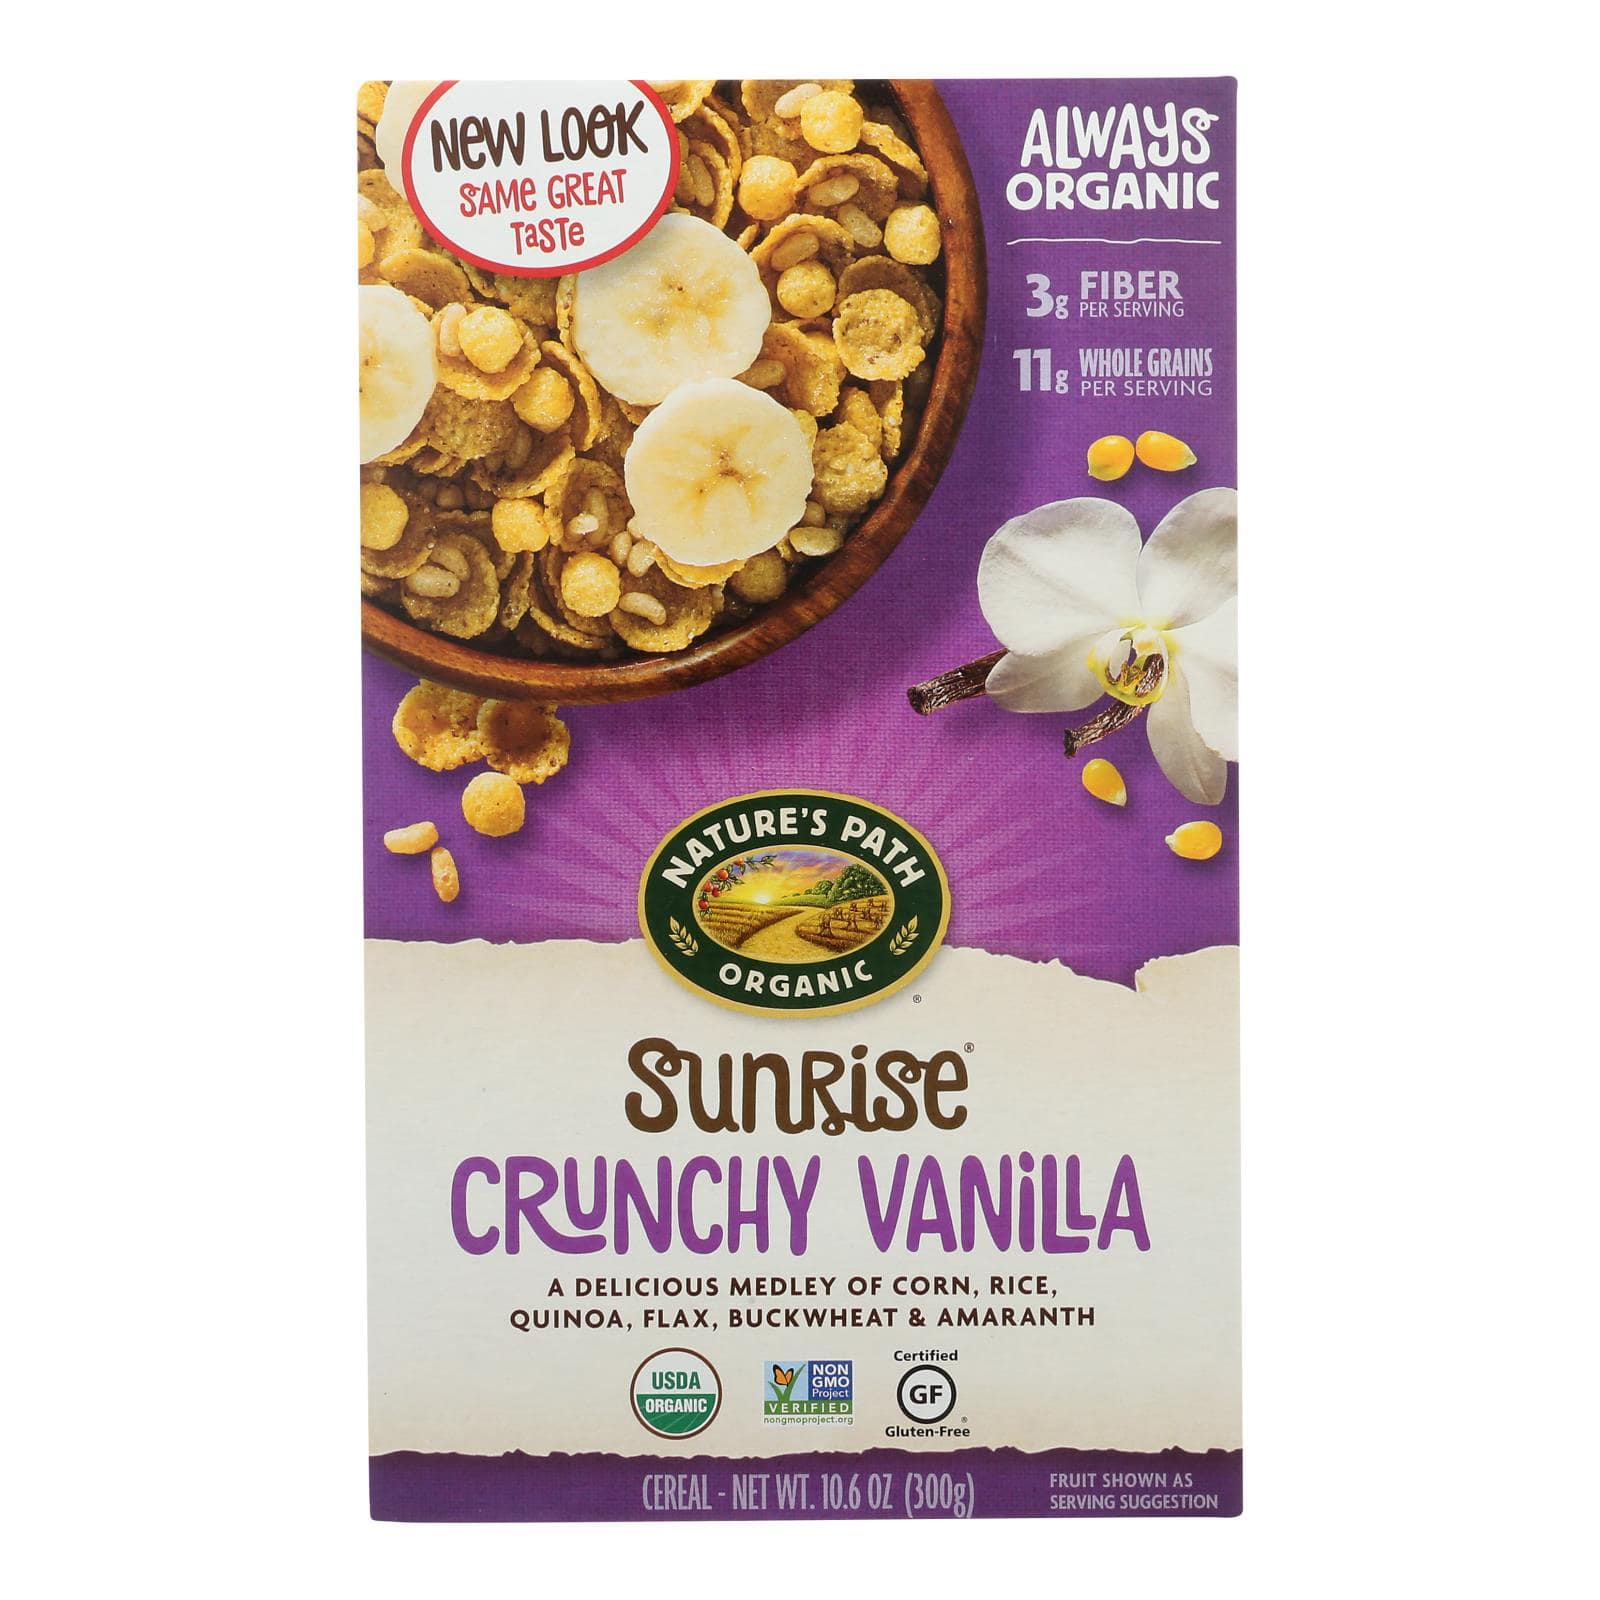 Buy Nature's Path Crunchy Vanilla - Sunrise - Case Of 12 - 10.6 Oz.  at OnlyNaturals.us